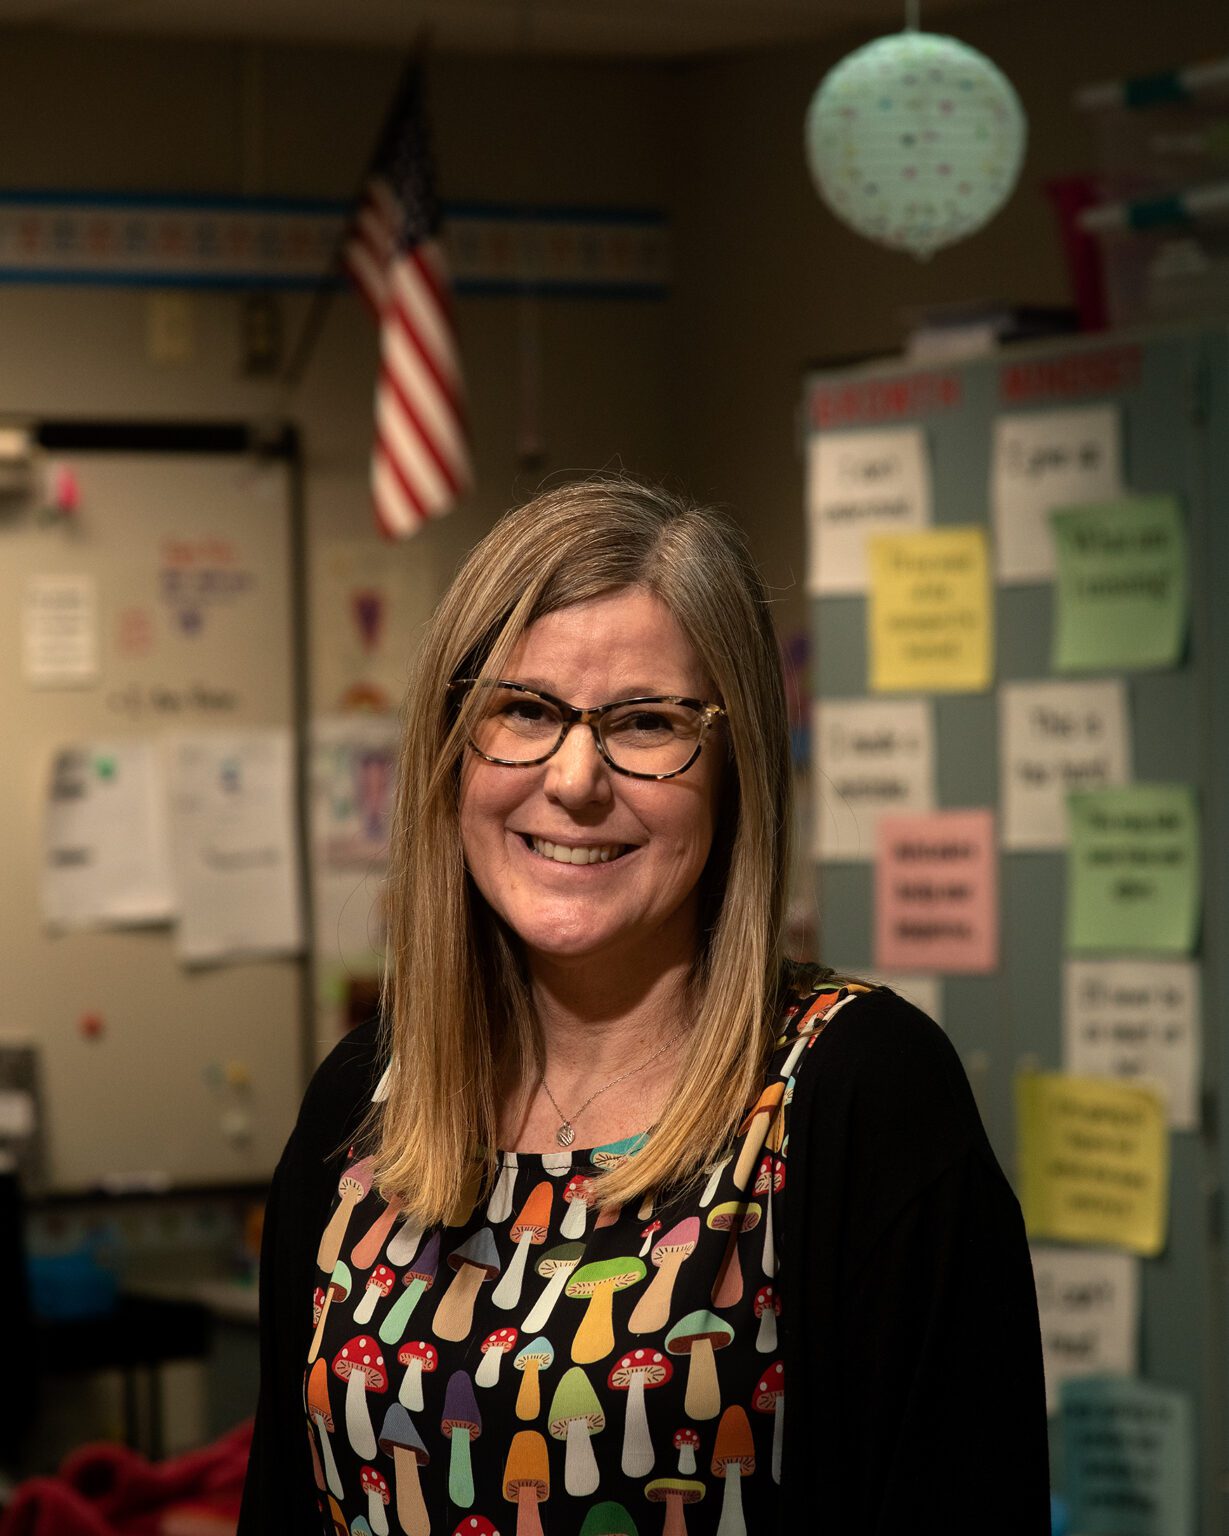 Tammy Alejandre teaches 2nd grade at Eagleridge Elementary in Ferndale. Alejandre has been teaching for over 20 years. She won the Washington State Teacher of the Year award in 2012.